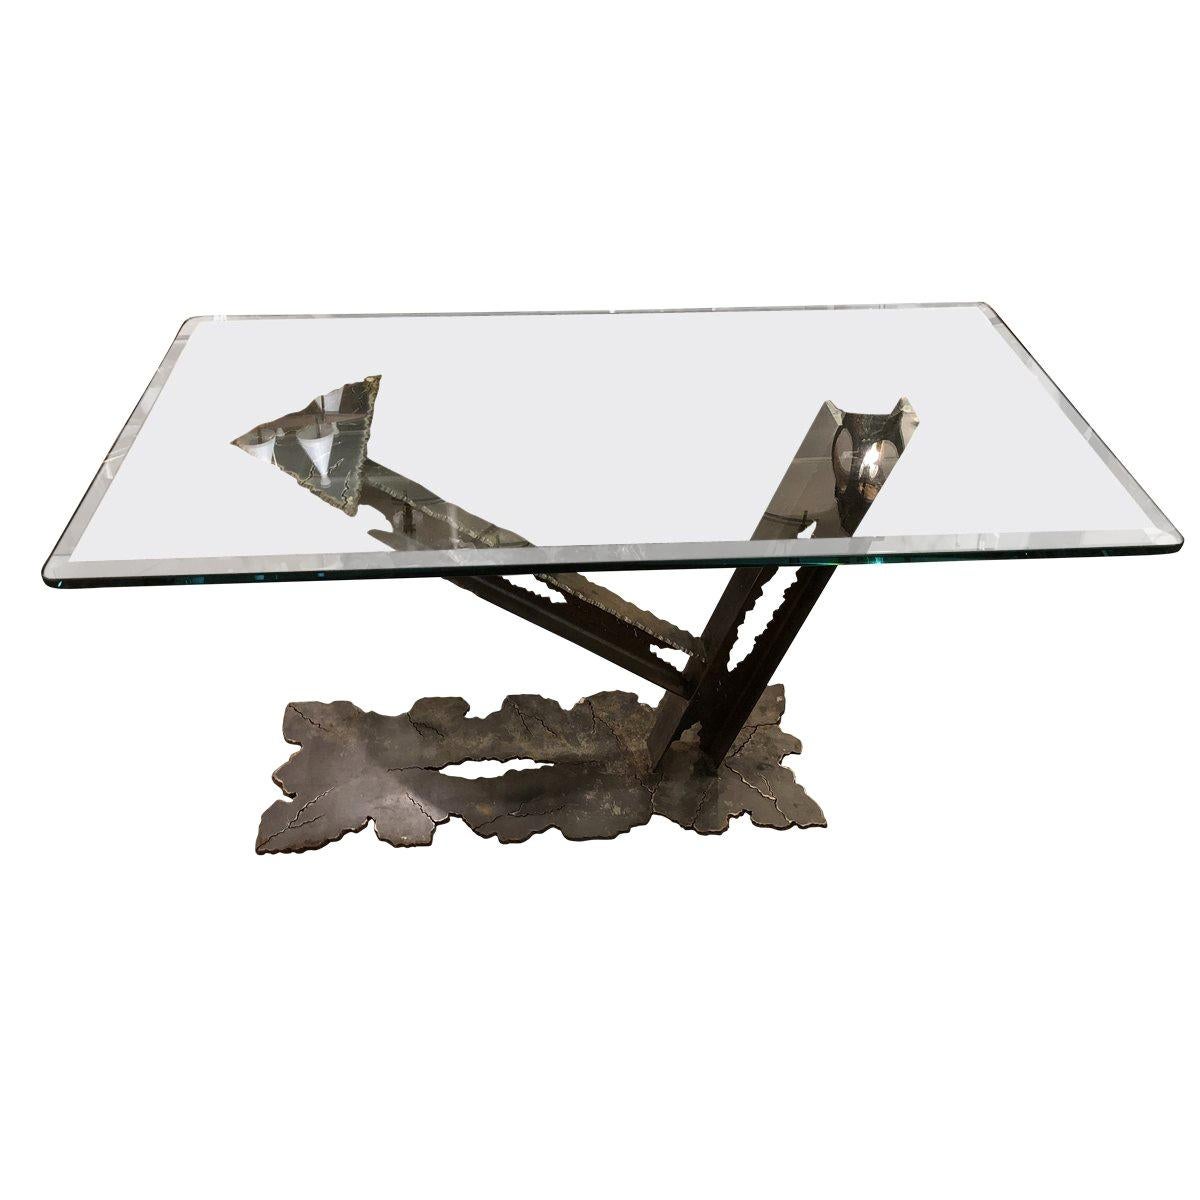 Contemporary Modern Sculptural Studio Console Table, 21st Century For Sale